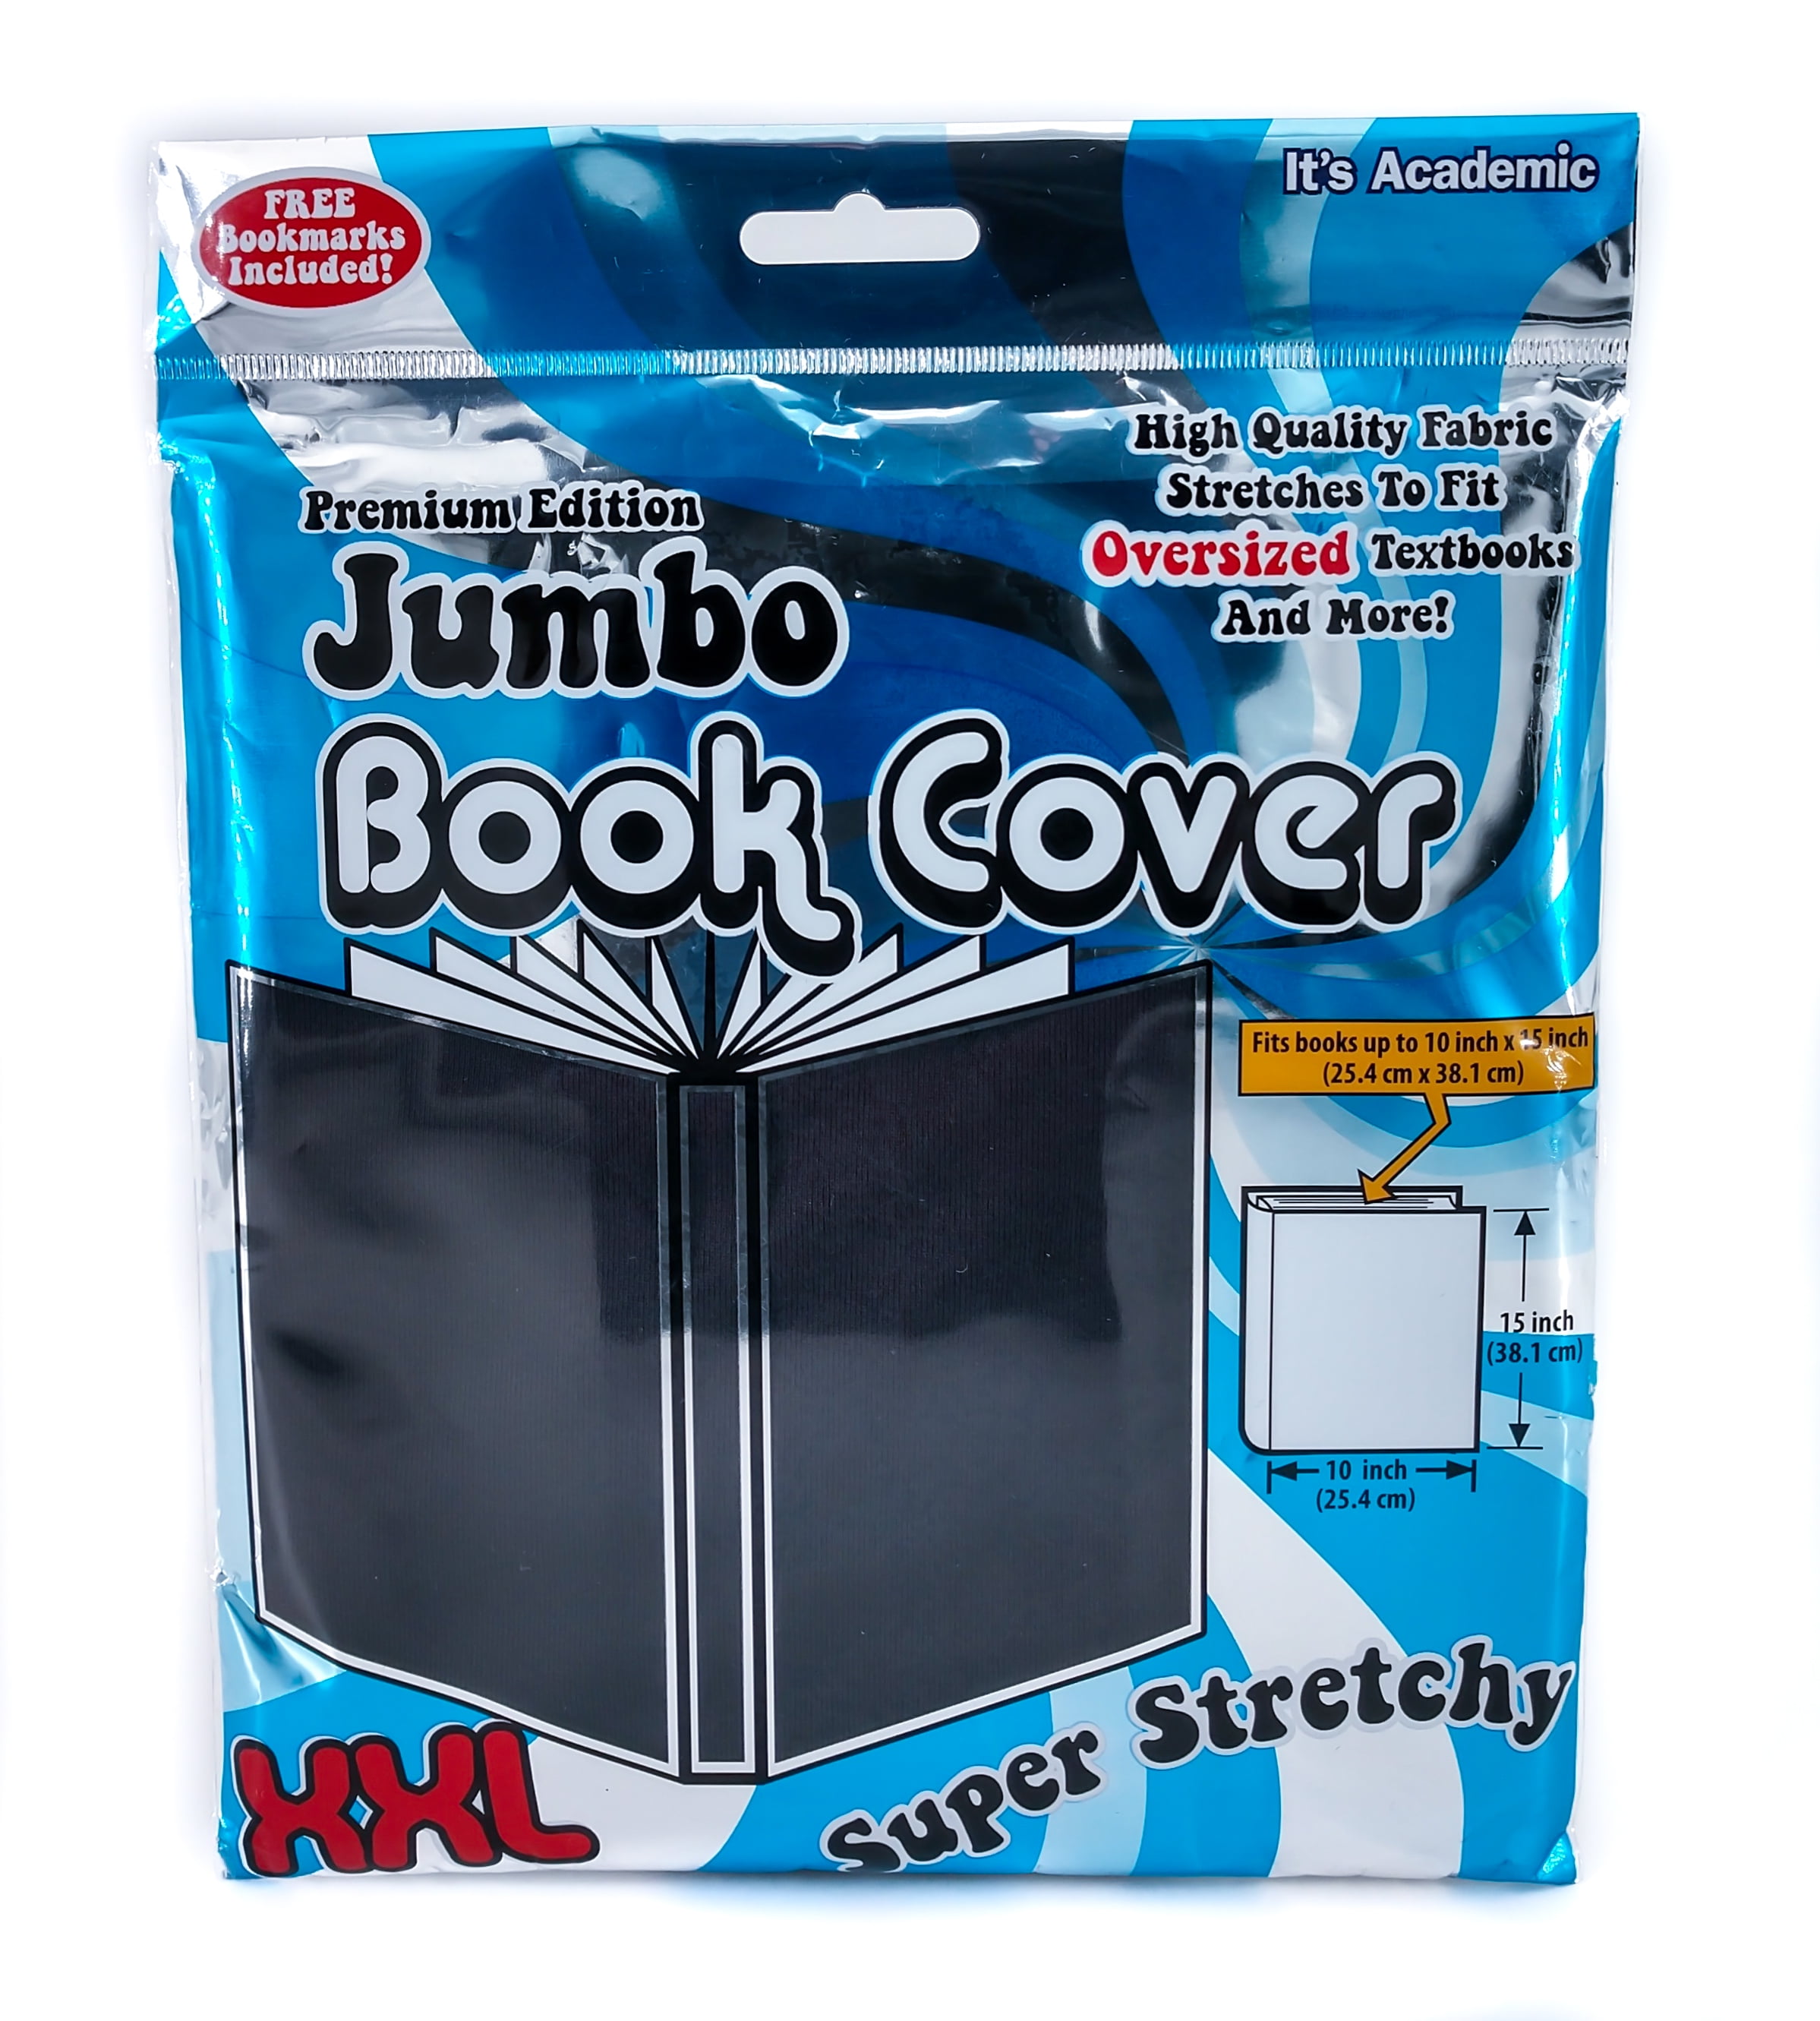 3 PK Assorted It's Academic Premium Edition Jumbo Book Covers XXL Stretchy 10x15 for sale online 